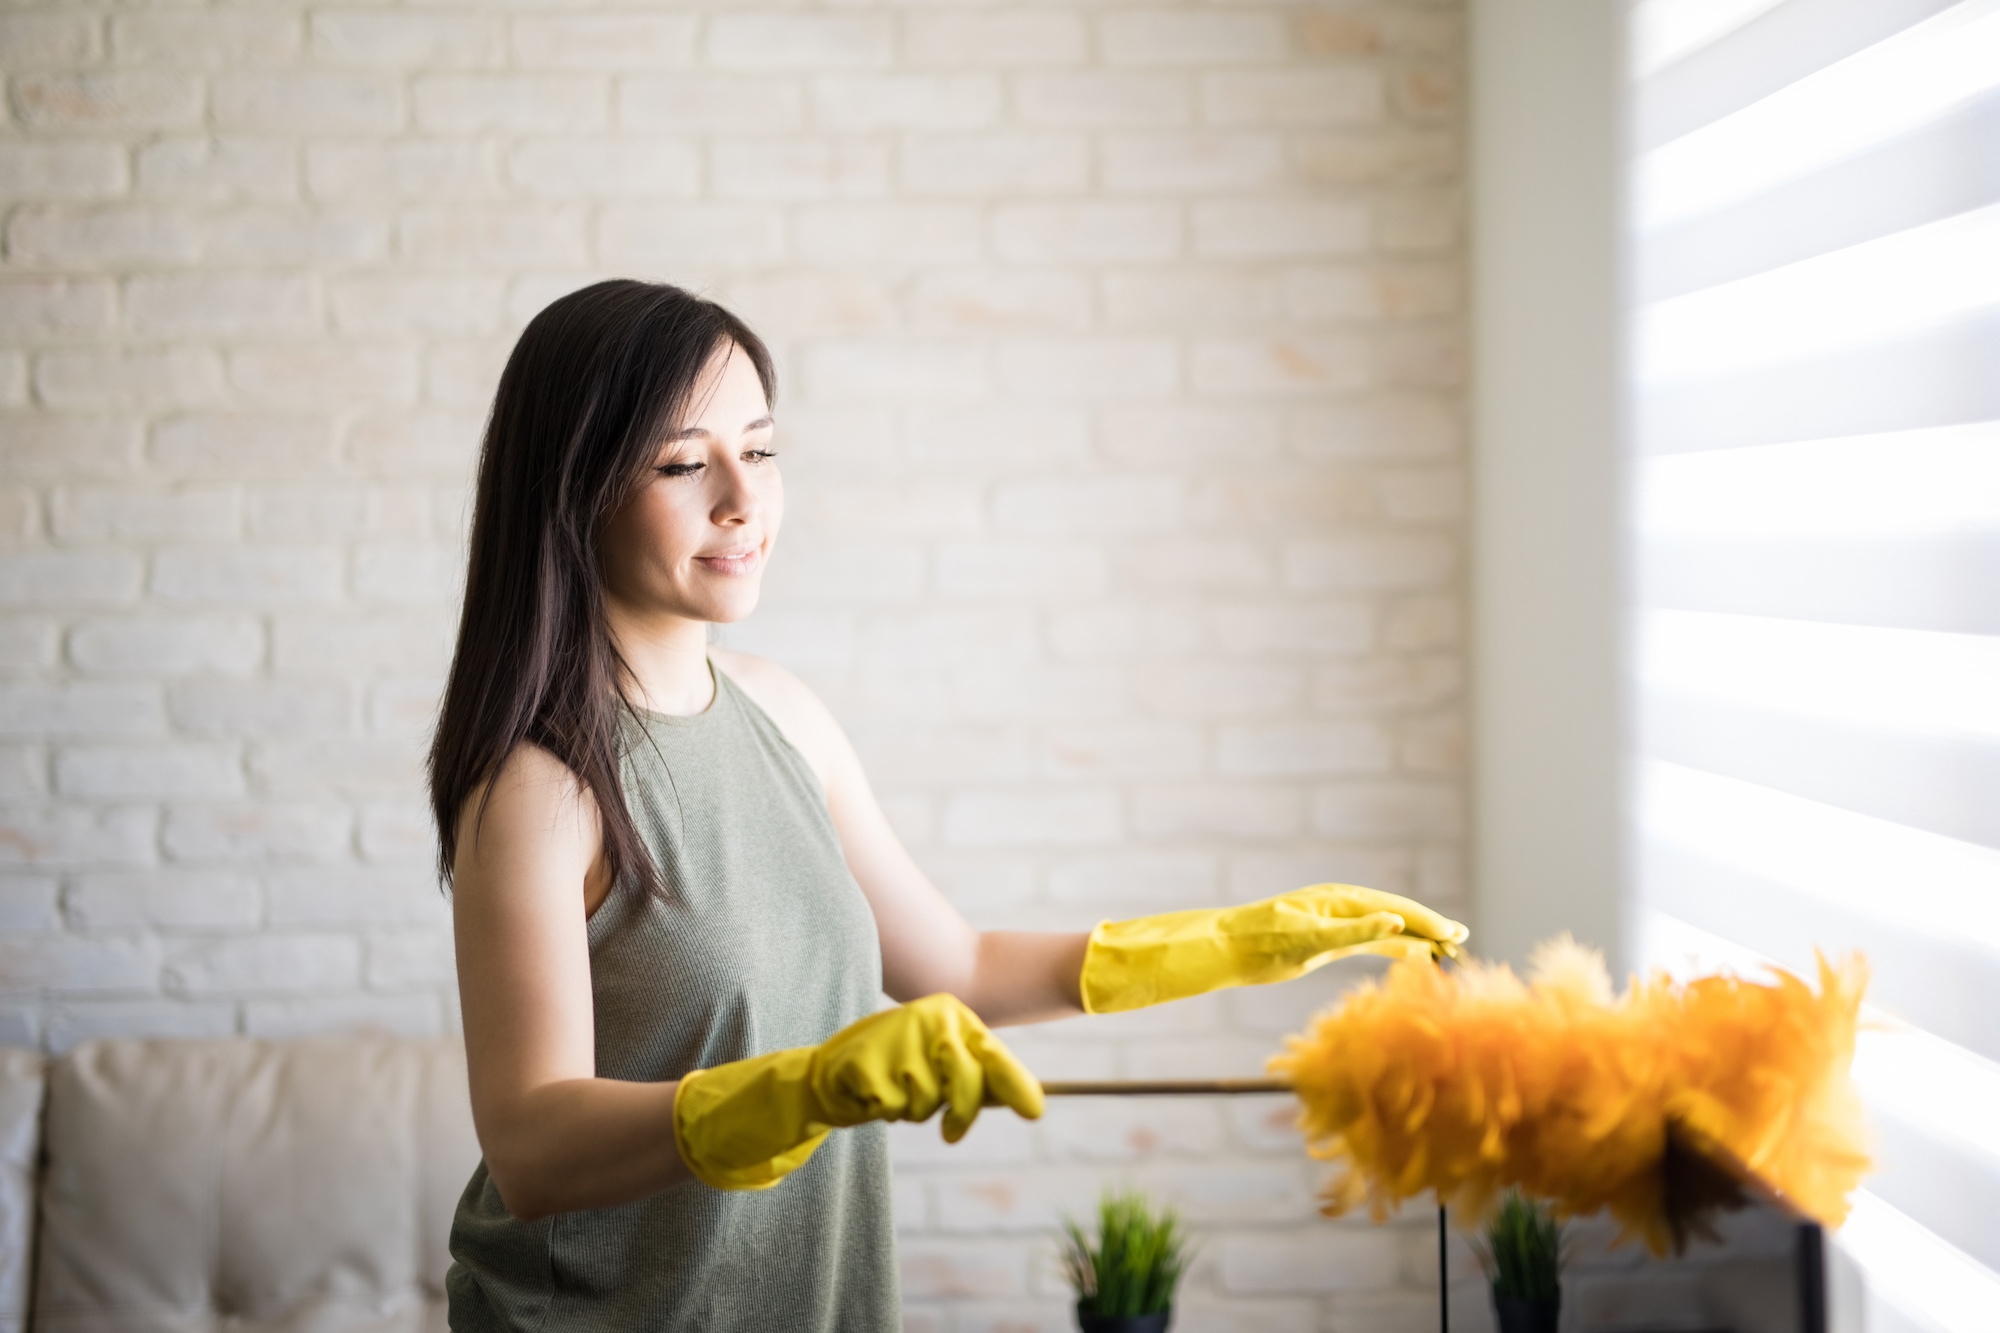 Woman cleans blinds with a yellow duster and yellow cleaning gloves. 